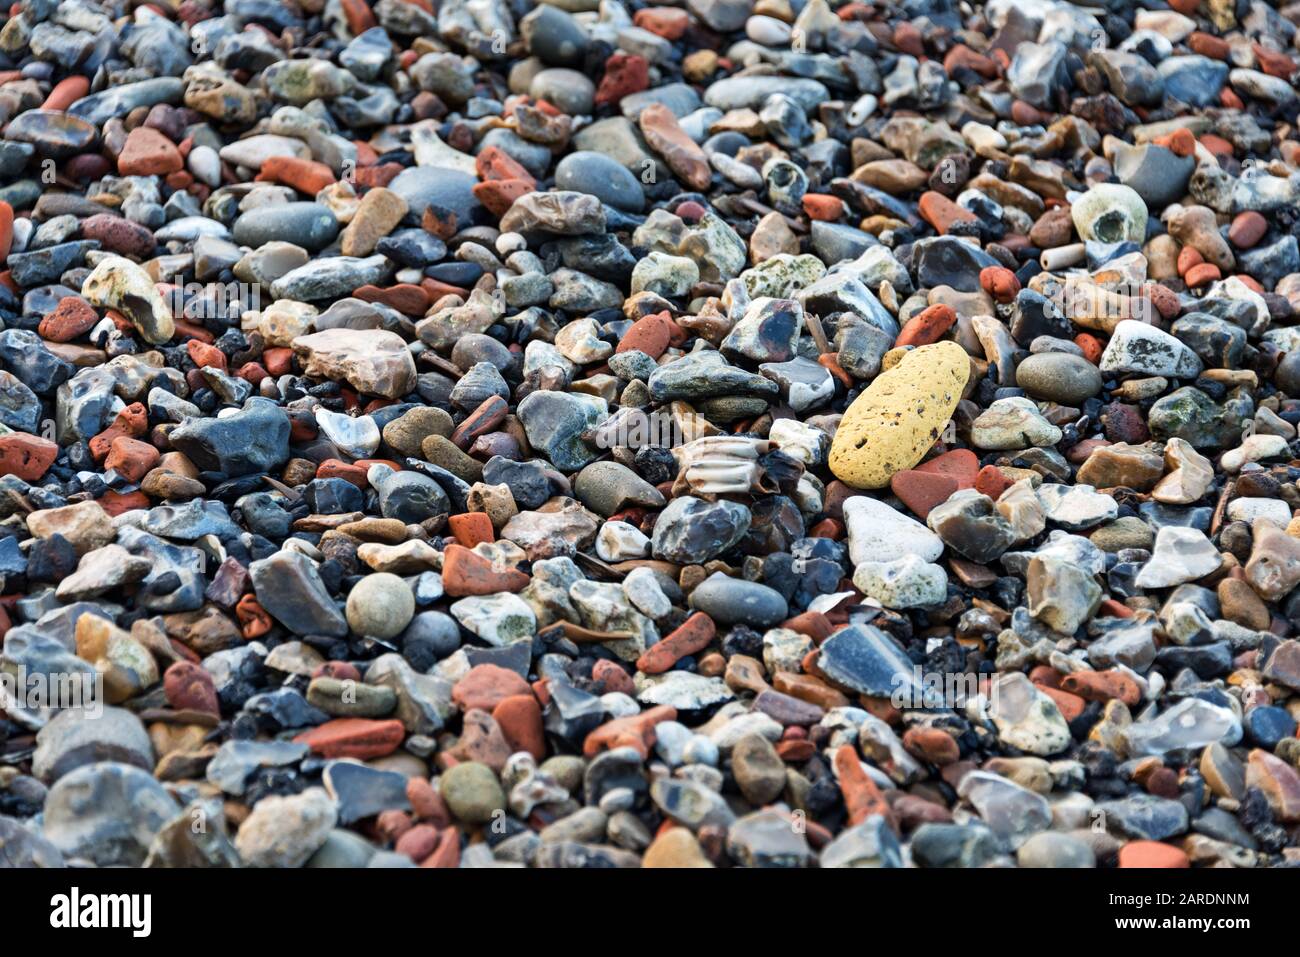 Herbivore tooth and yellow brick lying among fragments of brick, flint, chalk, and river stones, Greenwich, London. Stock Photo